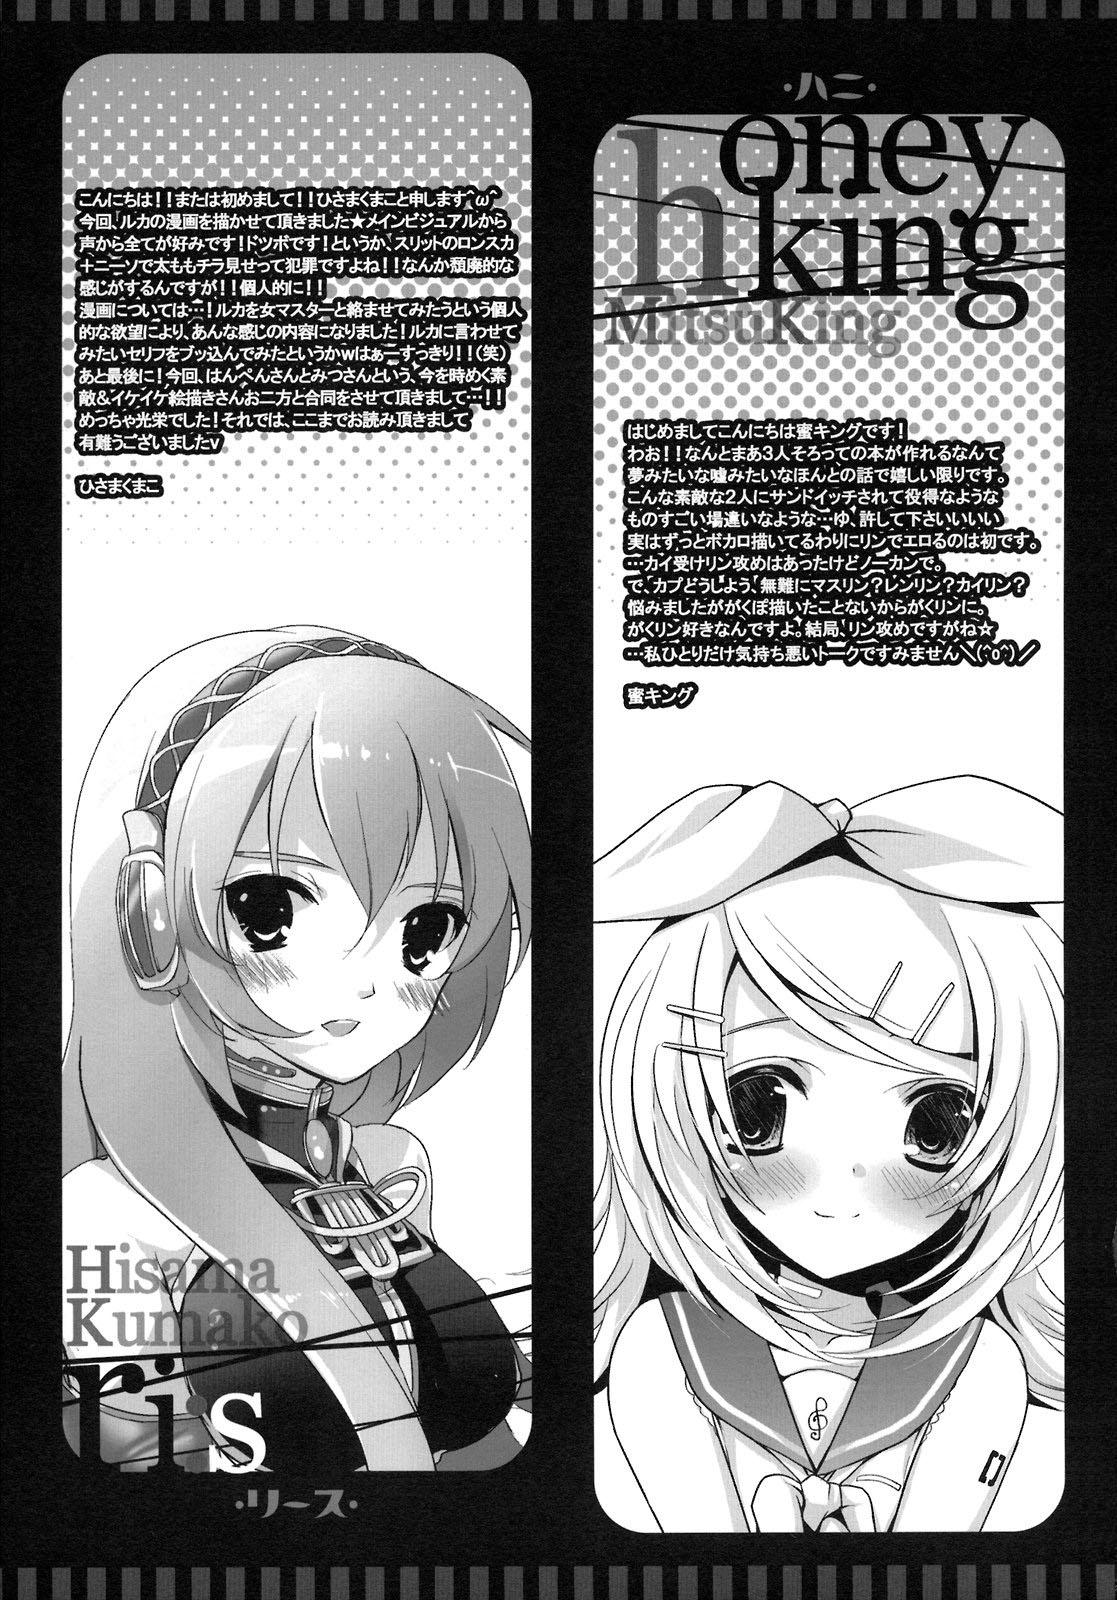 Pervs Puchi Hani Lease - Vocaloid Abg - Page 25